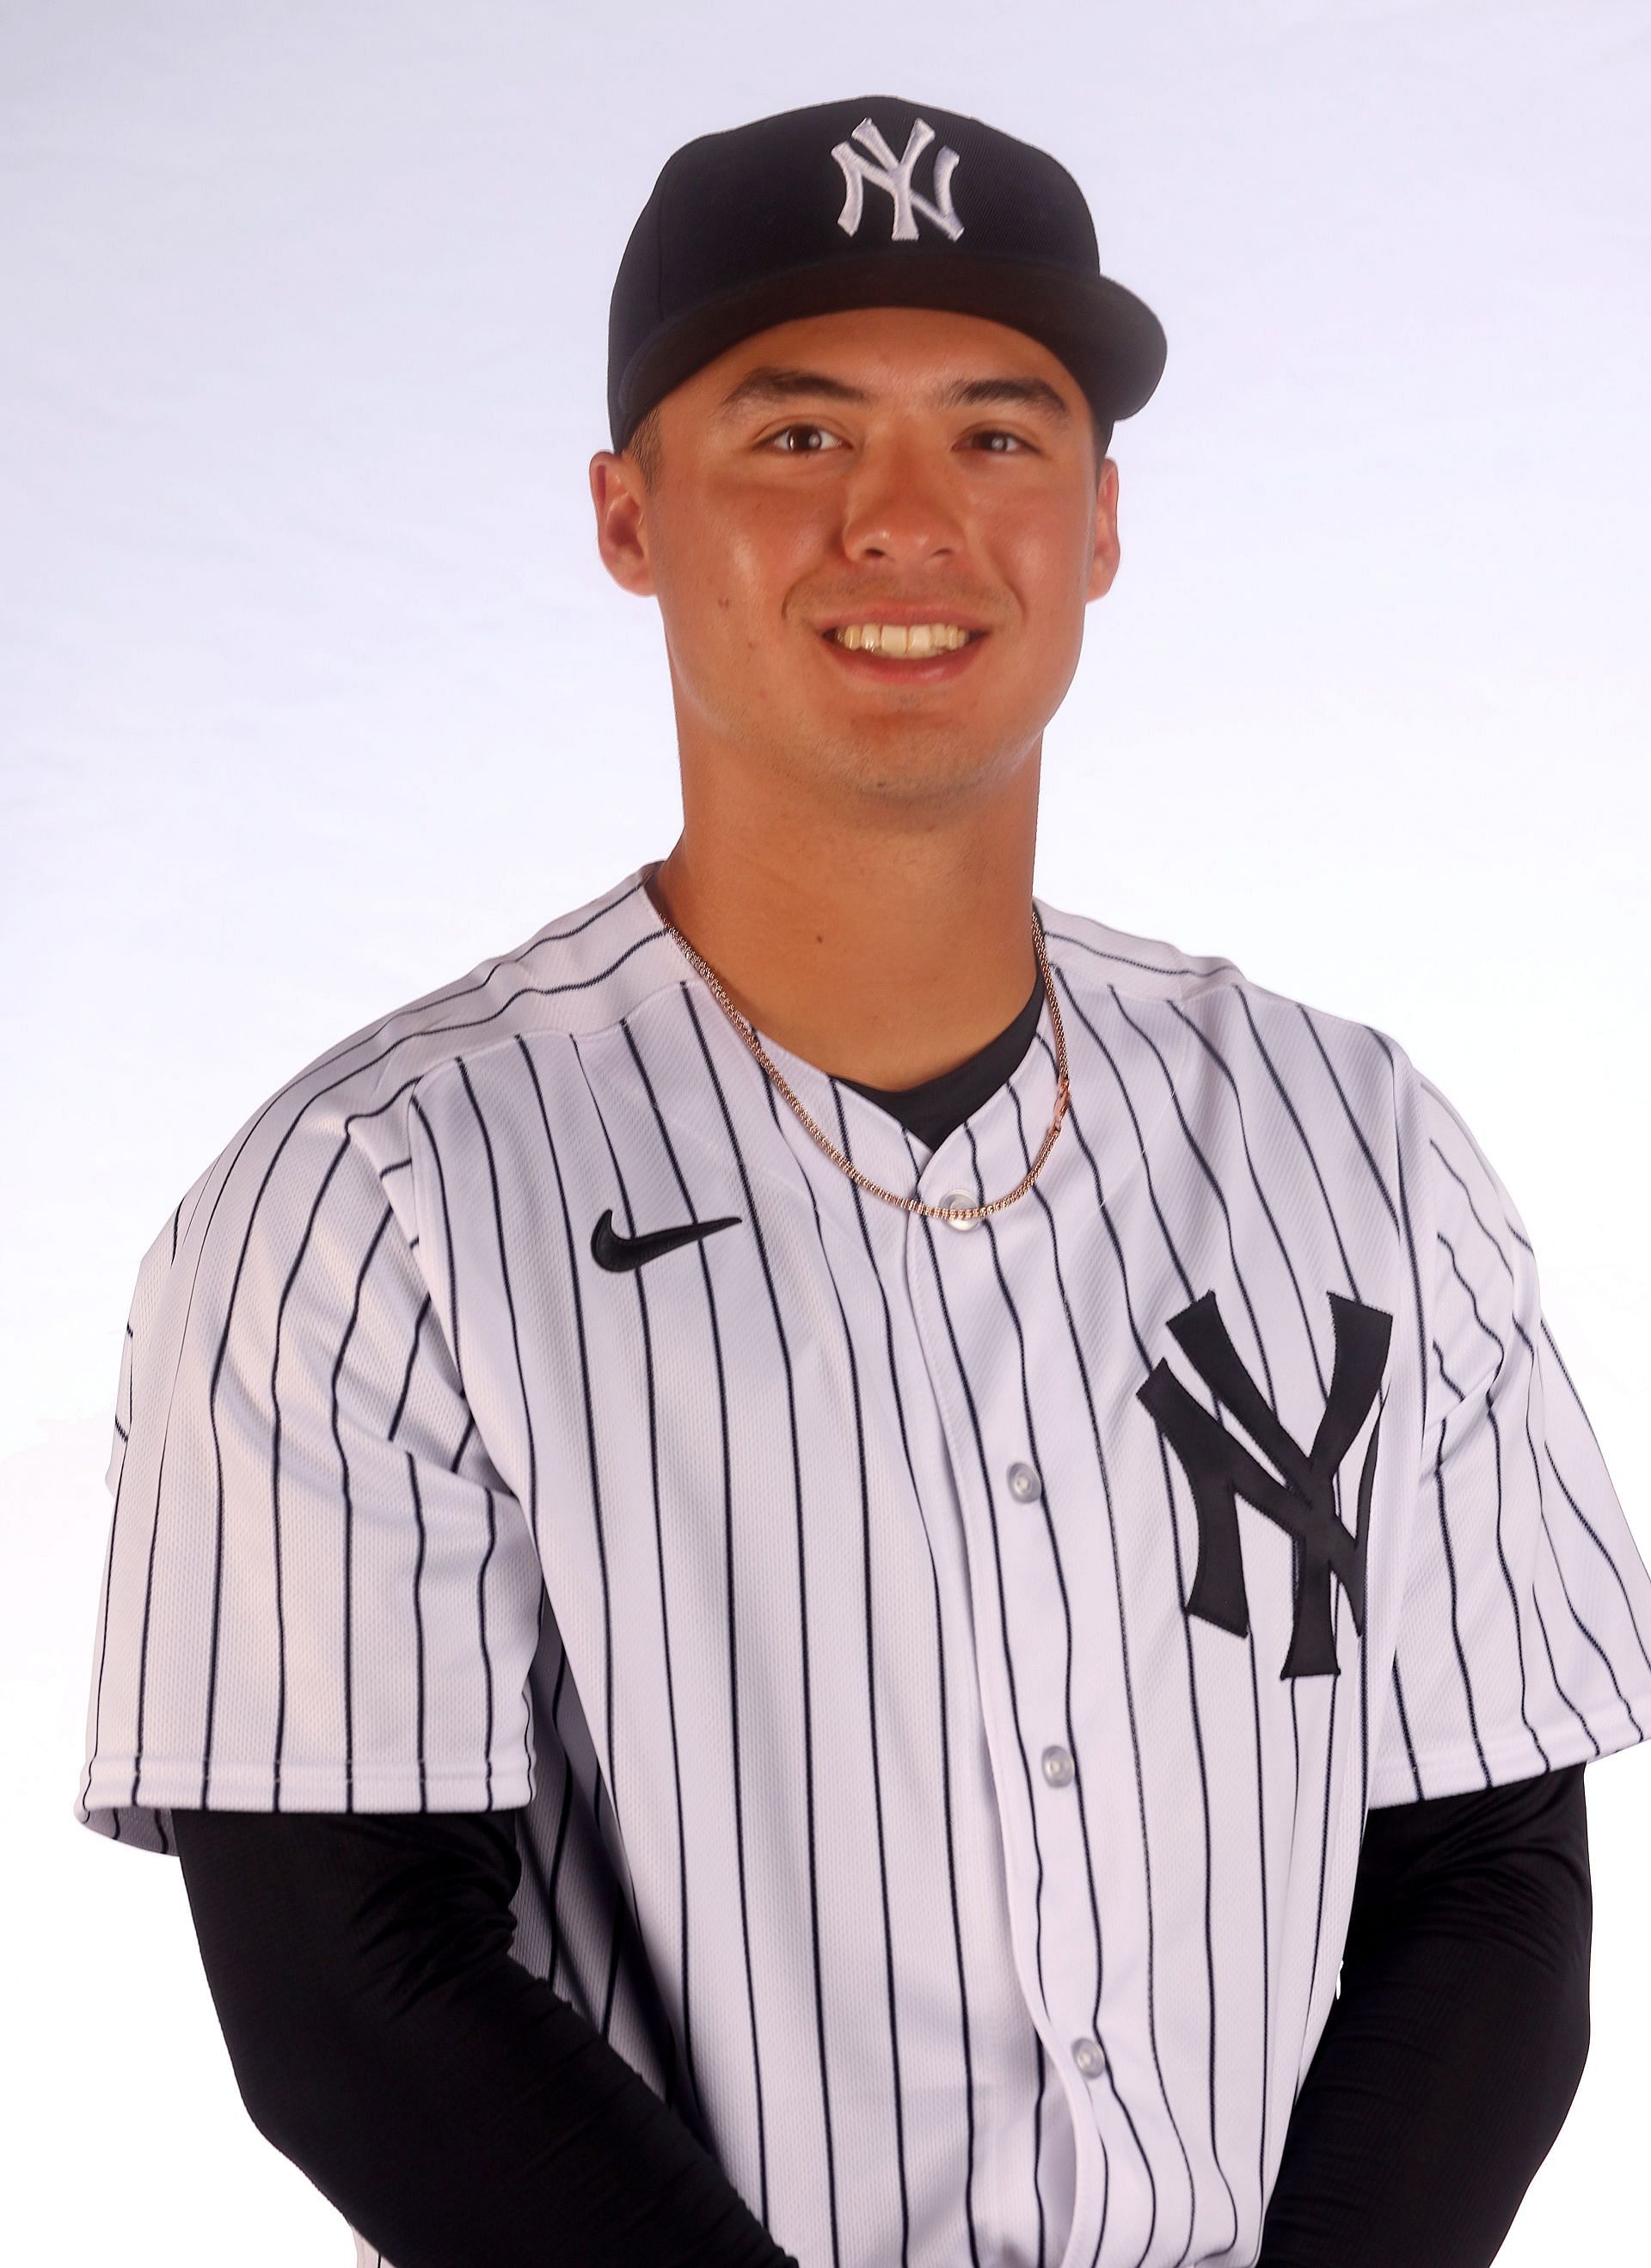 Anthony Volpe will represent NY Yankees in All-Star Futures Game